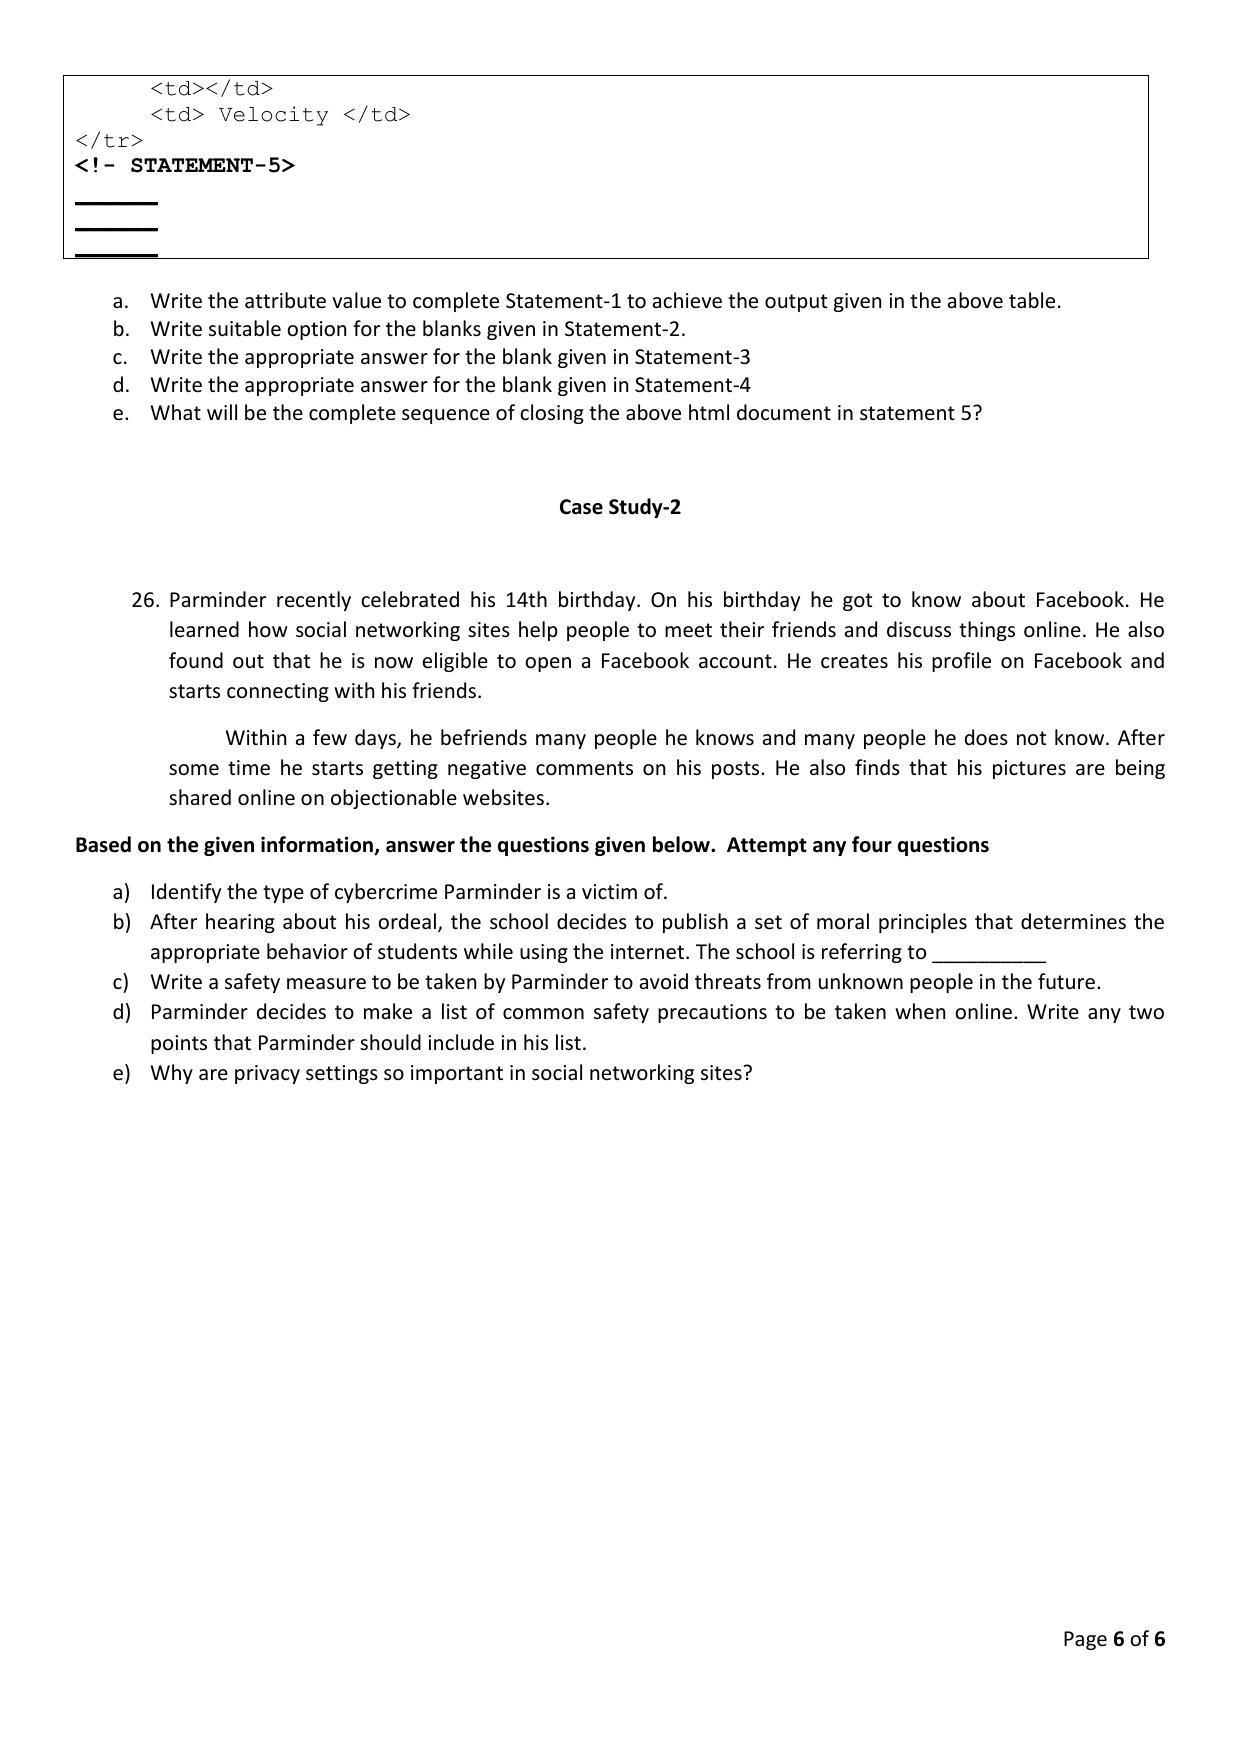 CBSE Class 10 Computer Application Sample Papers 2023 - Page 6